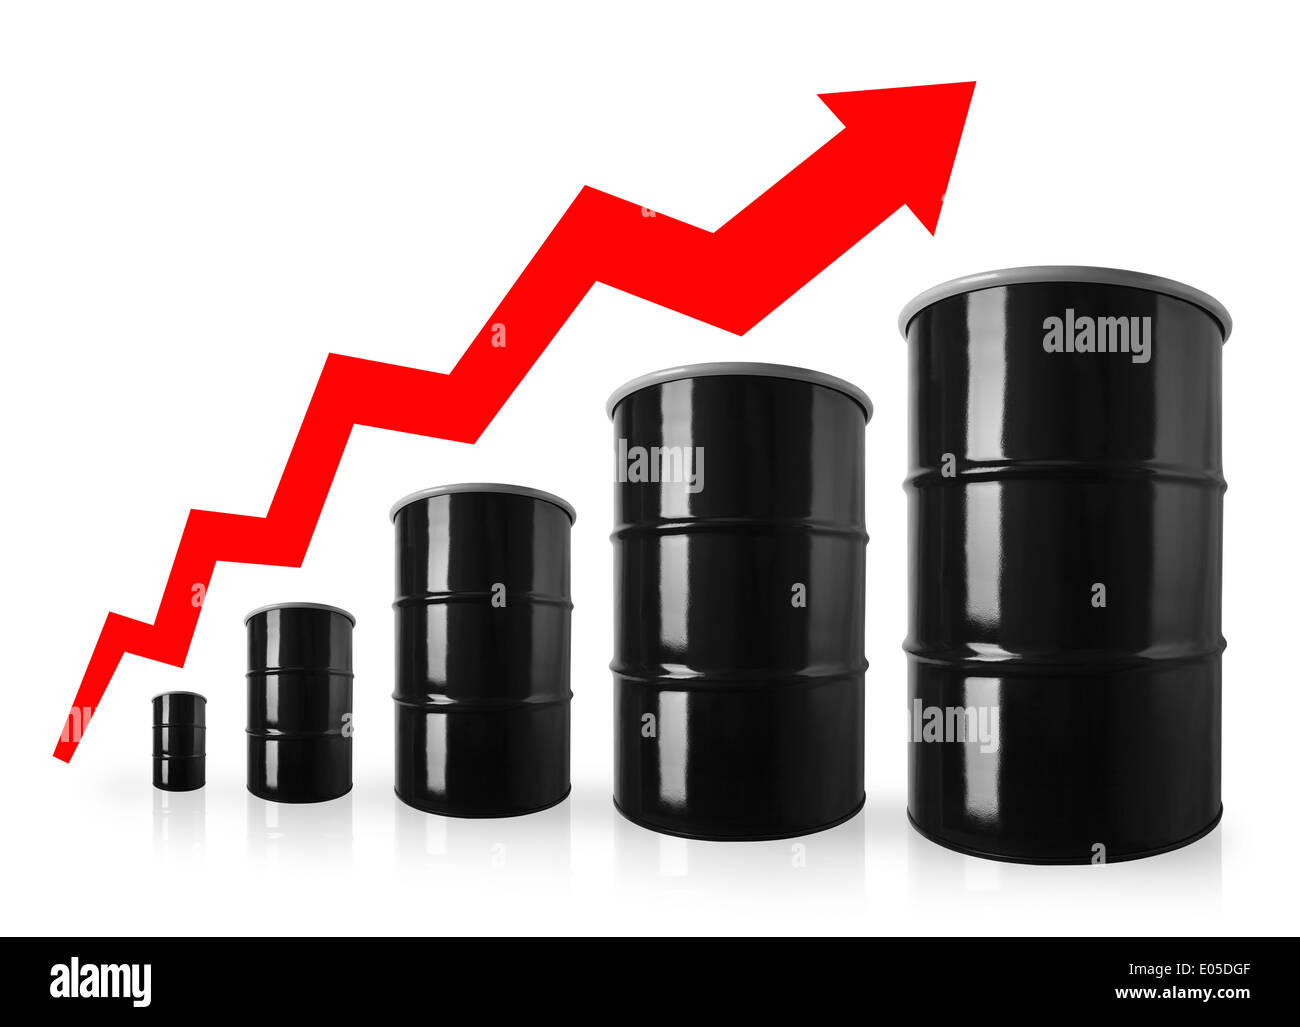 Oil Drum Stock Graph With Red Arrow Showing Increasing Price of Oil. Stock Photo